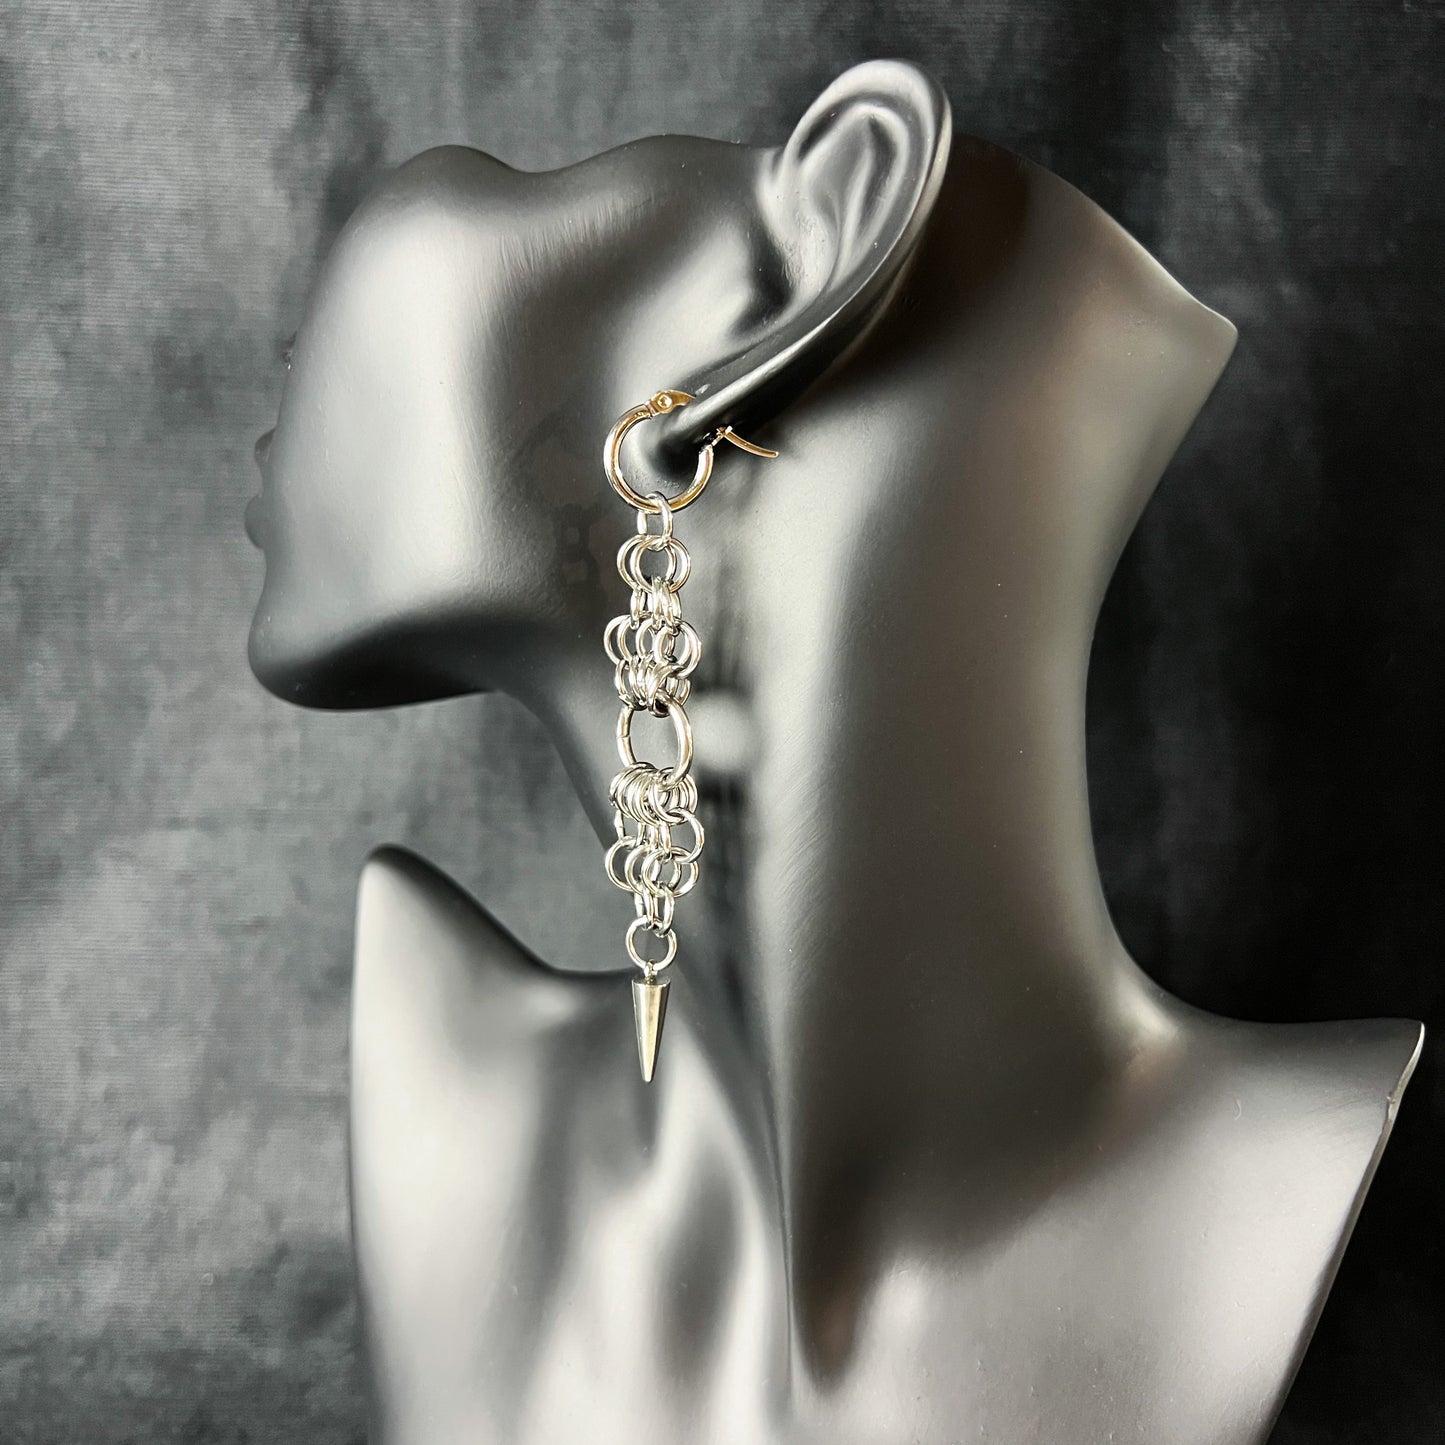 medieval fantasy gothic chainmail earrings